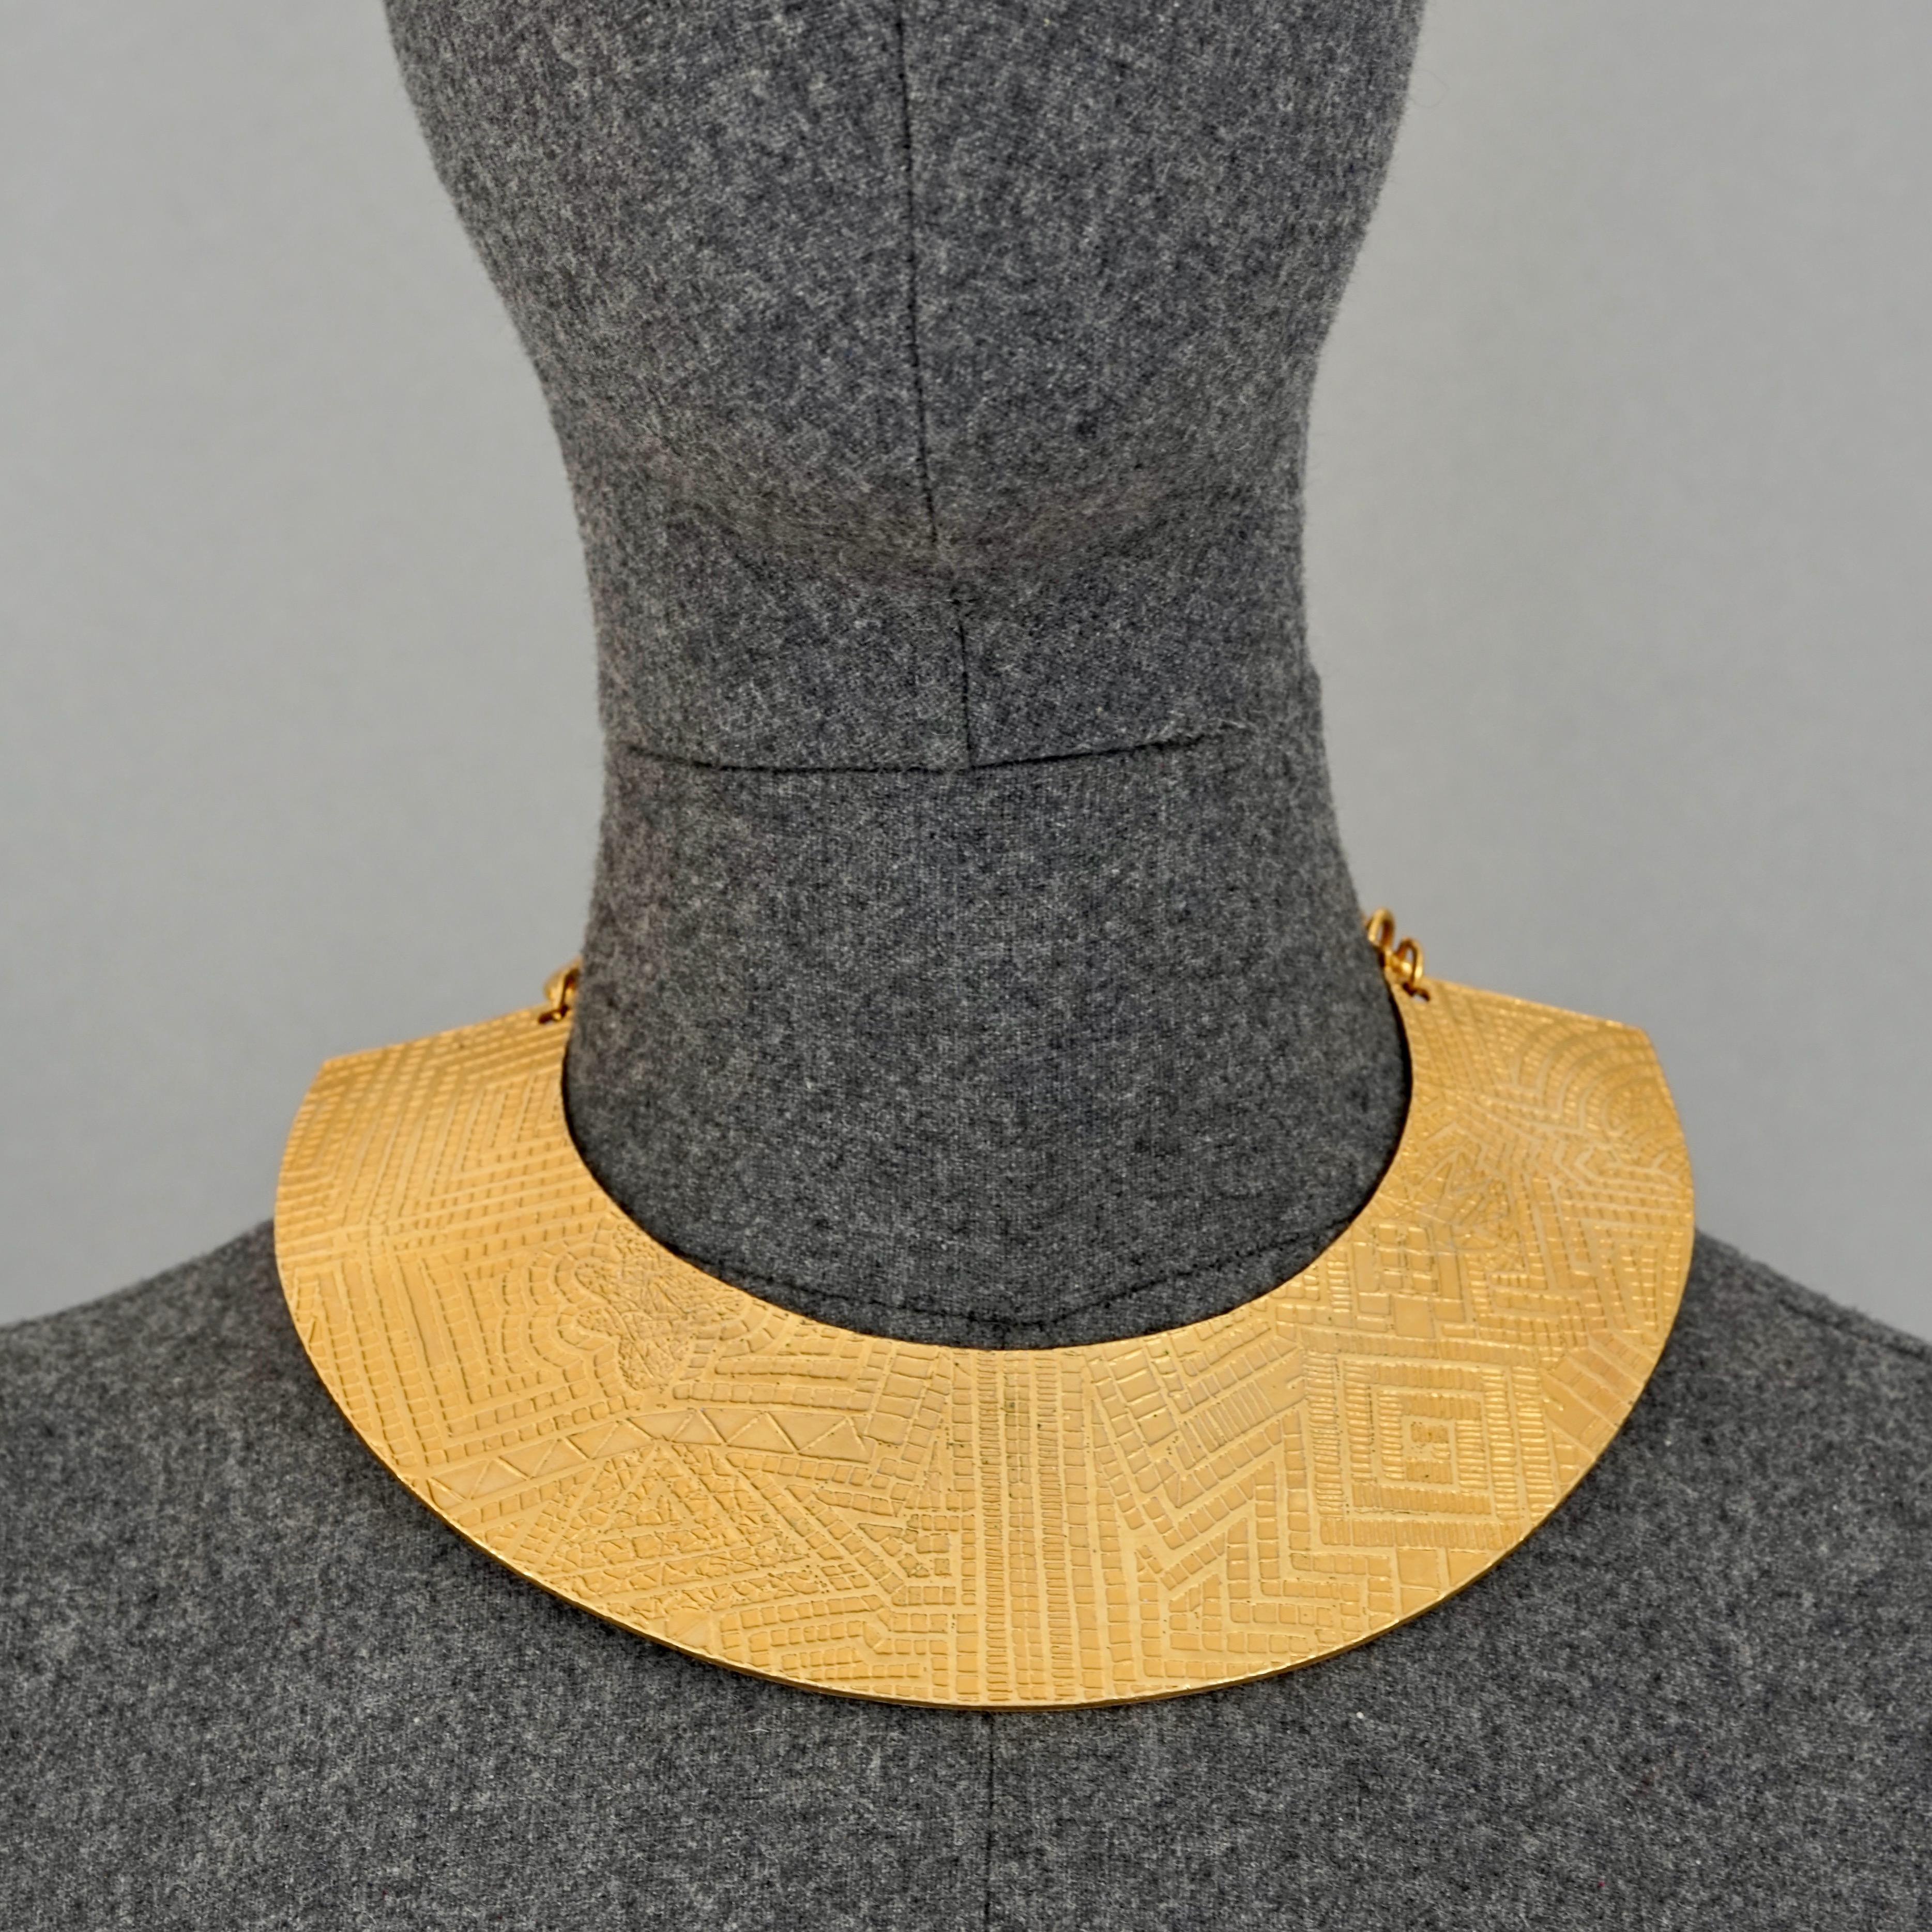 Vintage BICHE DE BERE Geometric Wide Collar Necklace

Measurements:
Height: 1.96 inches (5 cm)
Wearable Length: 12.99 inches (33 cm) max including the chain

Limited edition. This is the 123rd out of 289 pieces.

Features:
- 100% Authentic BICHE DE